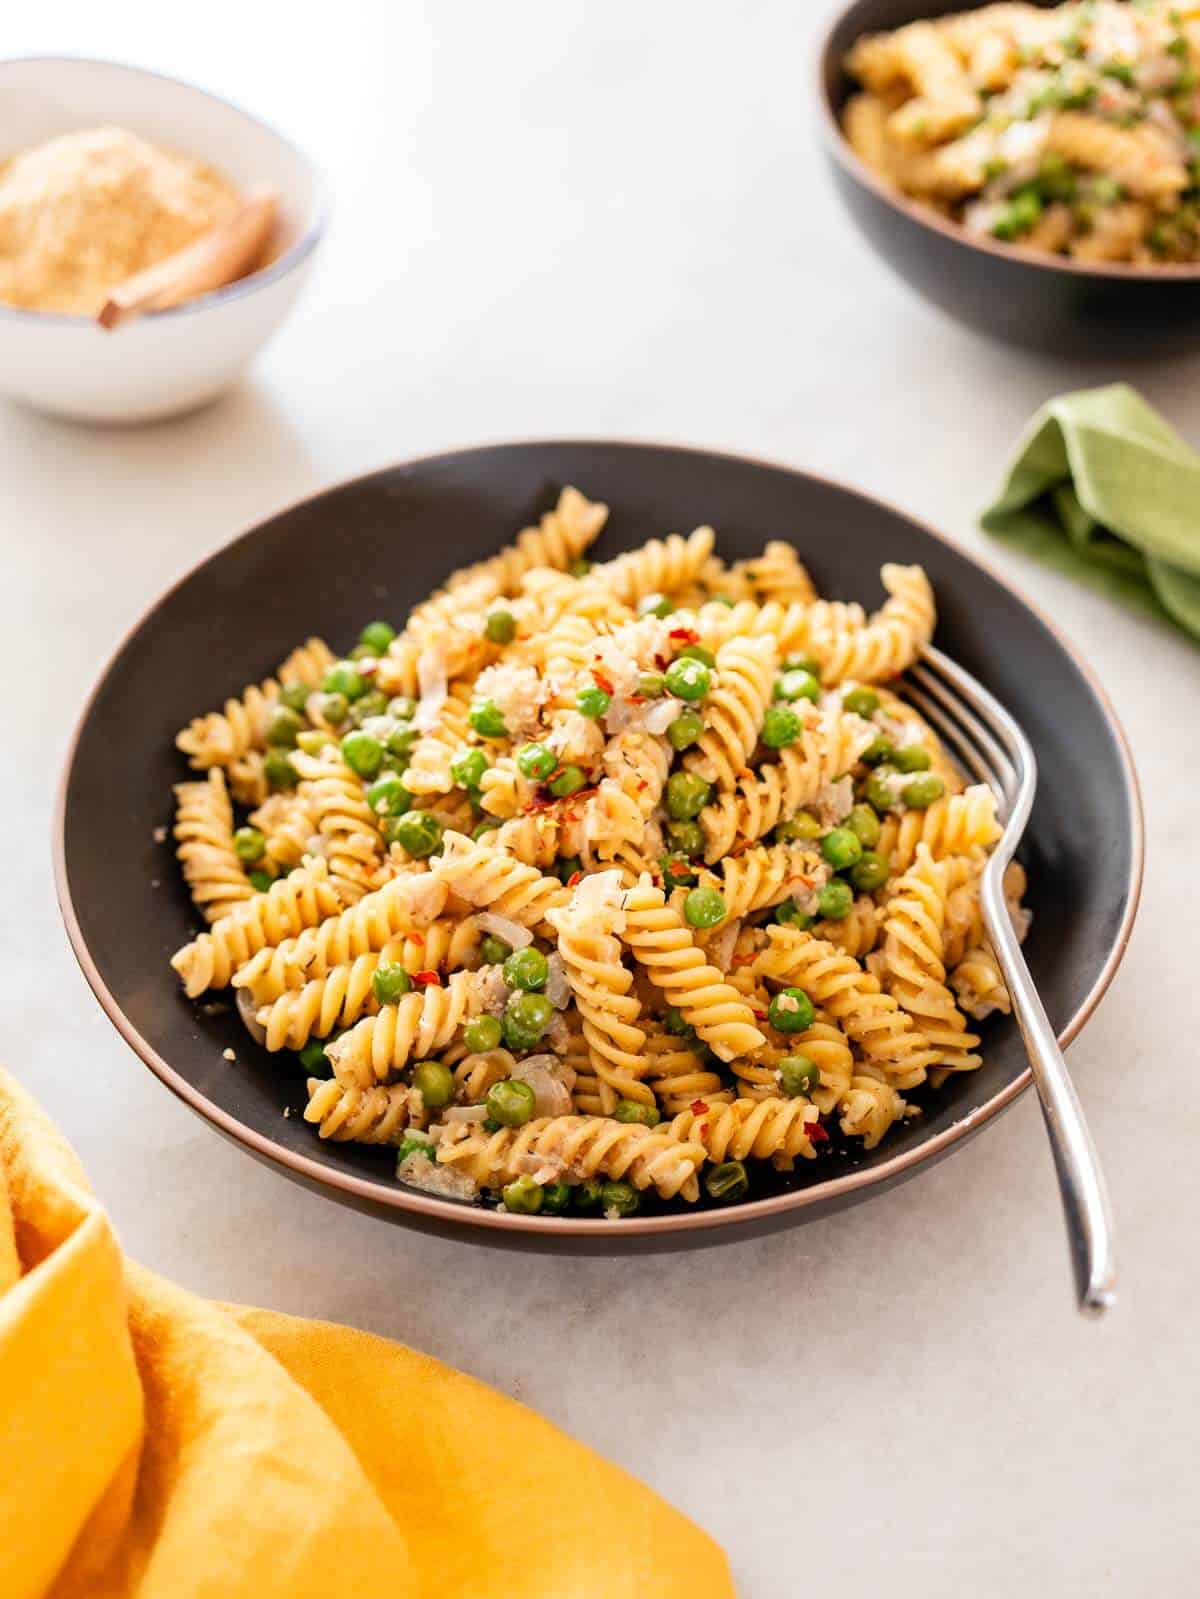 Peas and Pasta Recipe served with red pepper flakes.